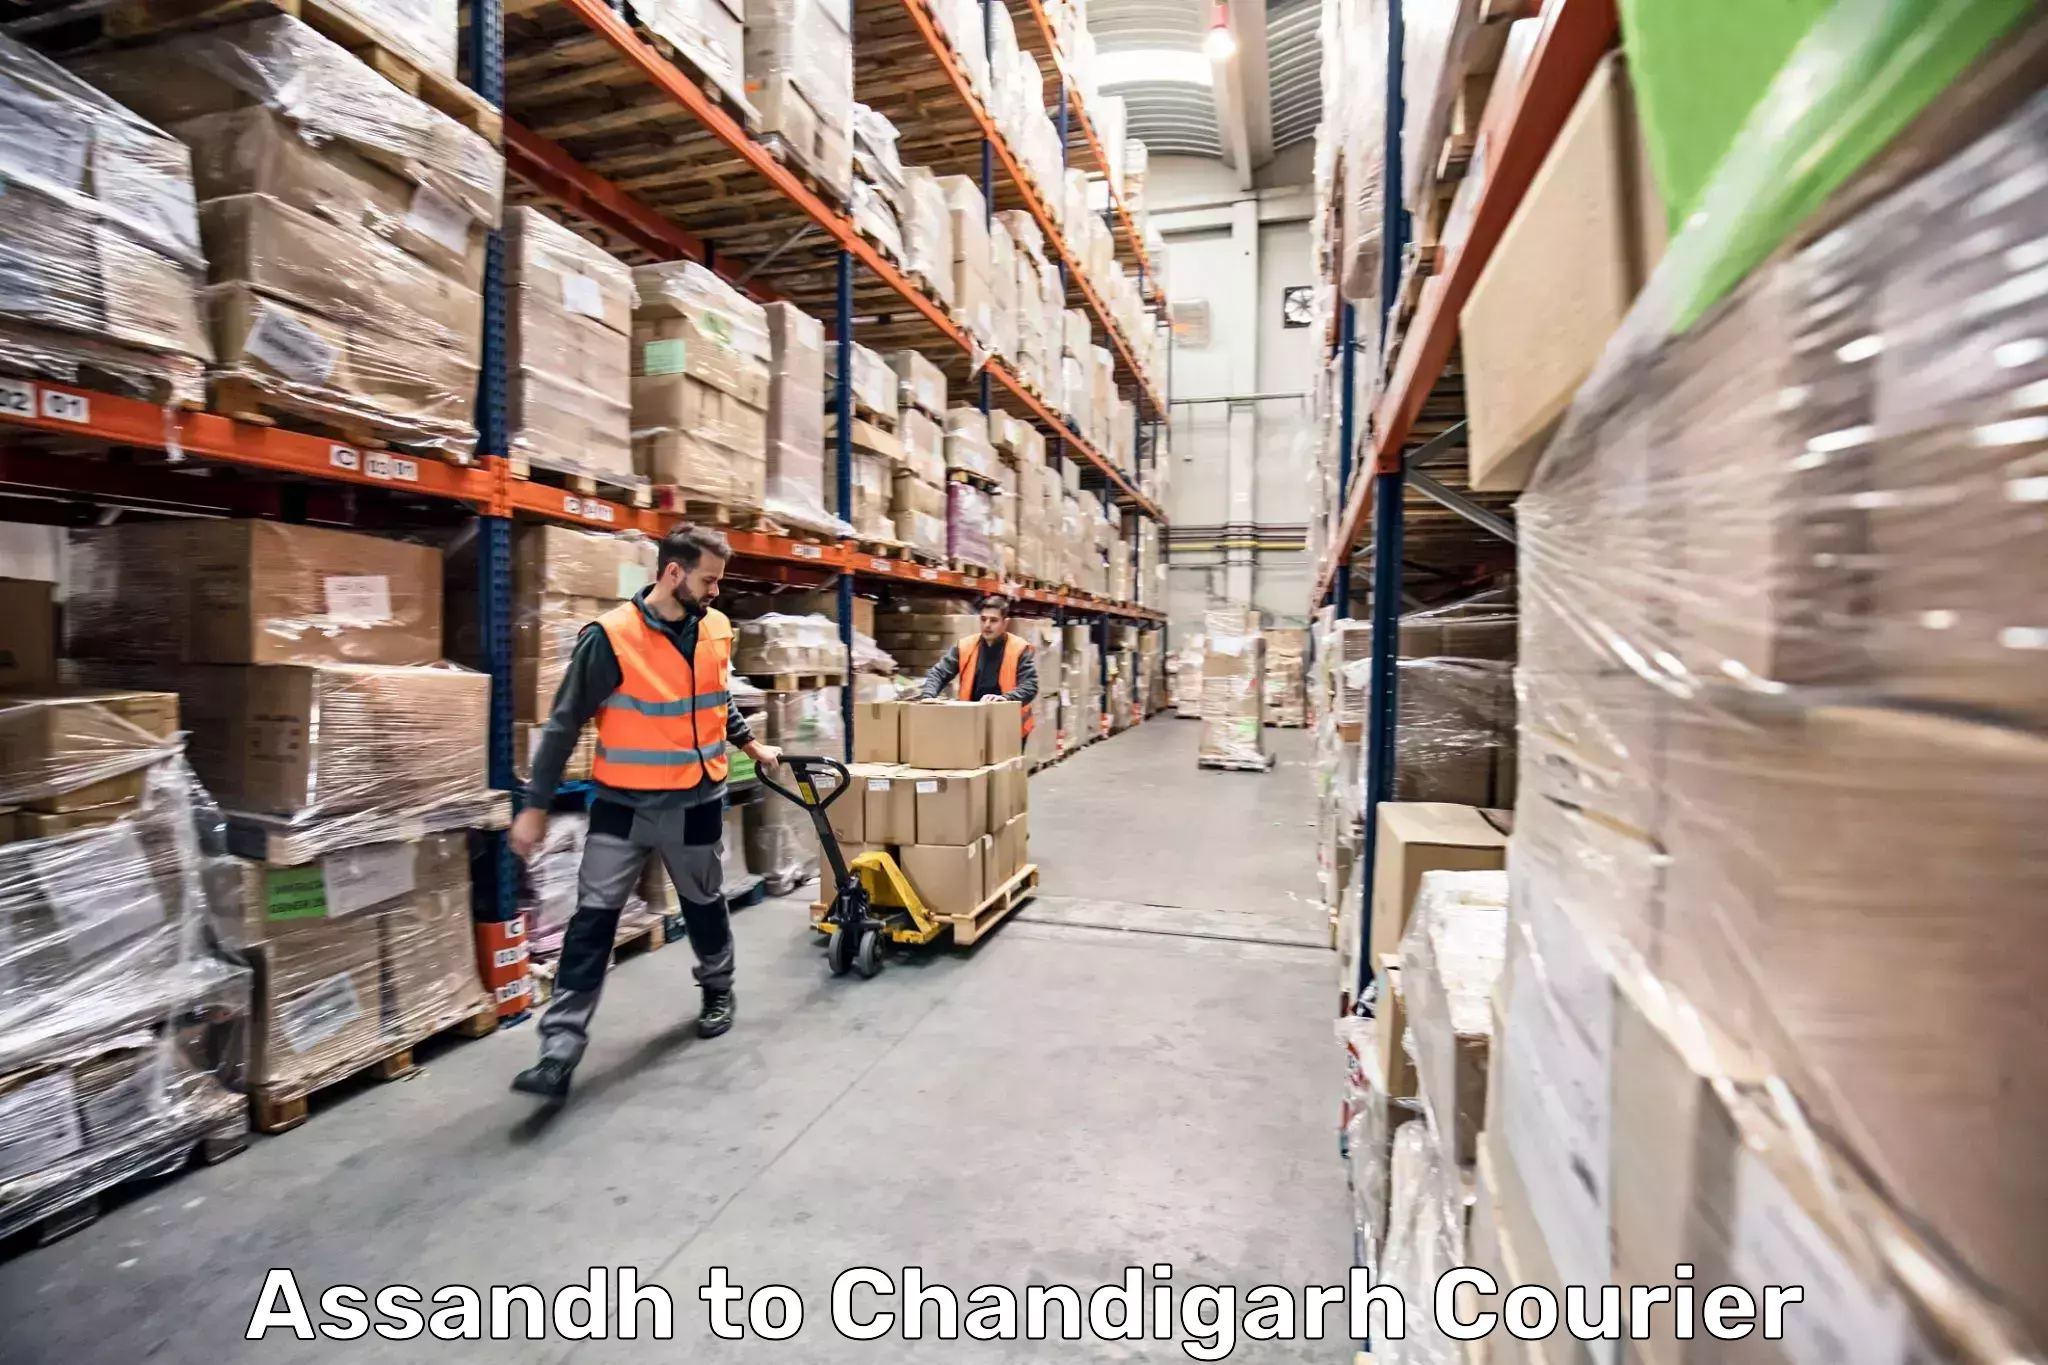 Baggage transport technology Assandh to Chandigarh